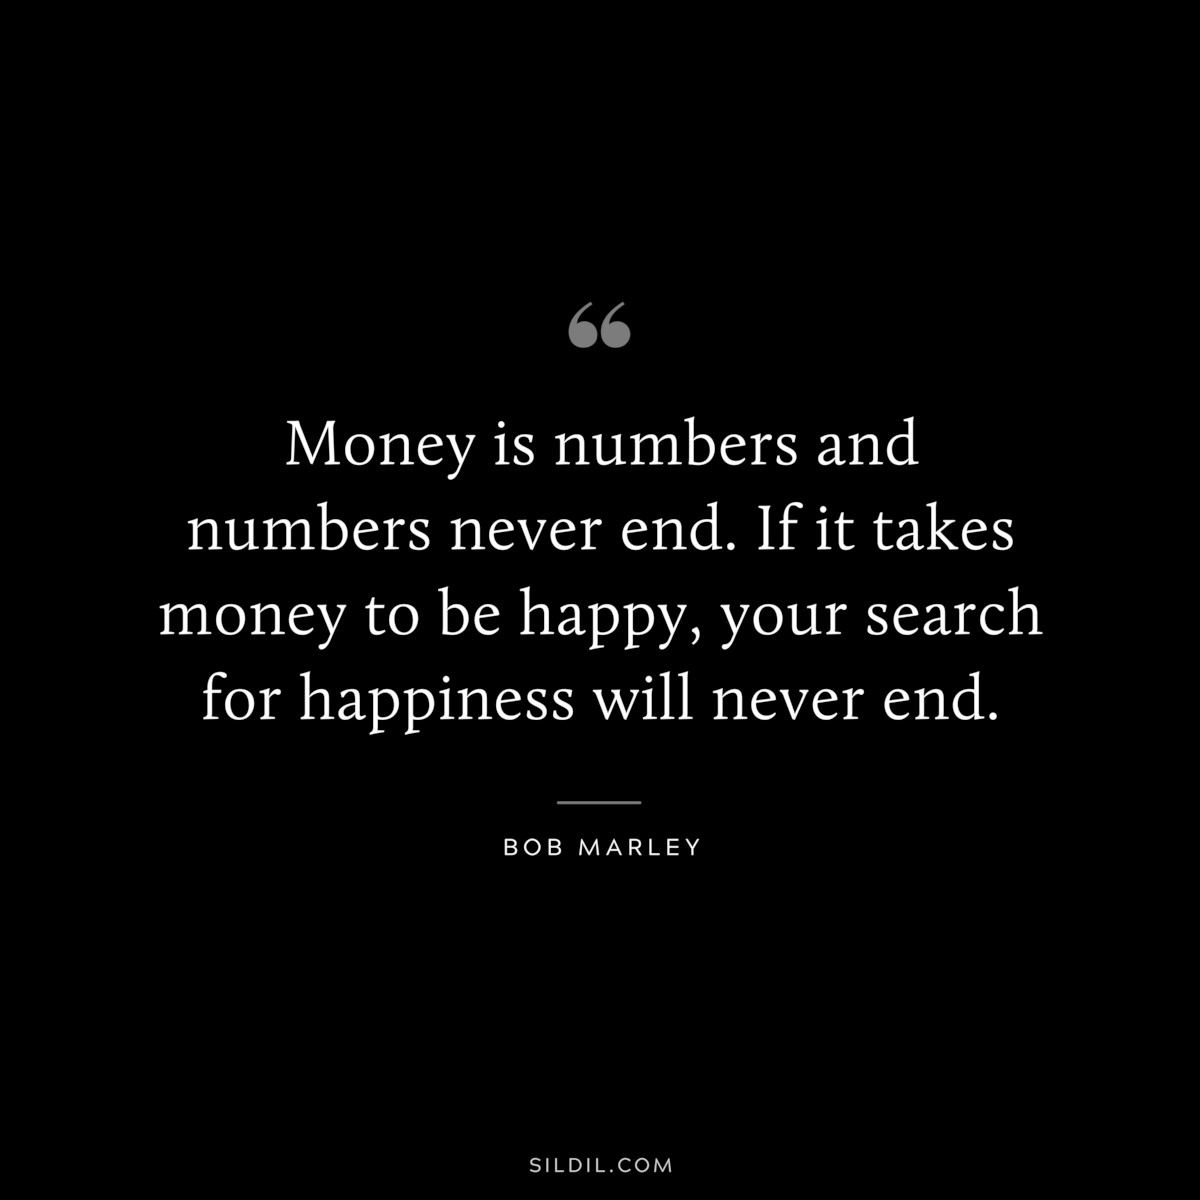 Money is numbers and numbers never end. If it takes money to be happy, your search for happiness will never end. ― Bob Marley